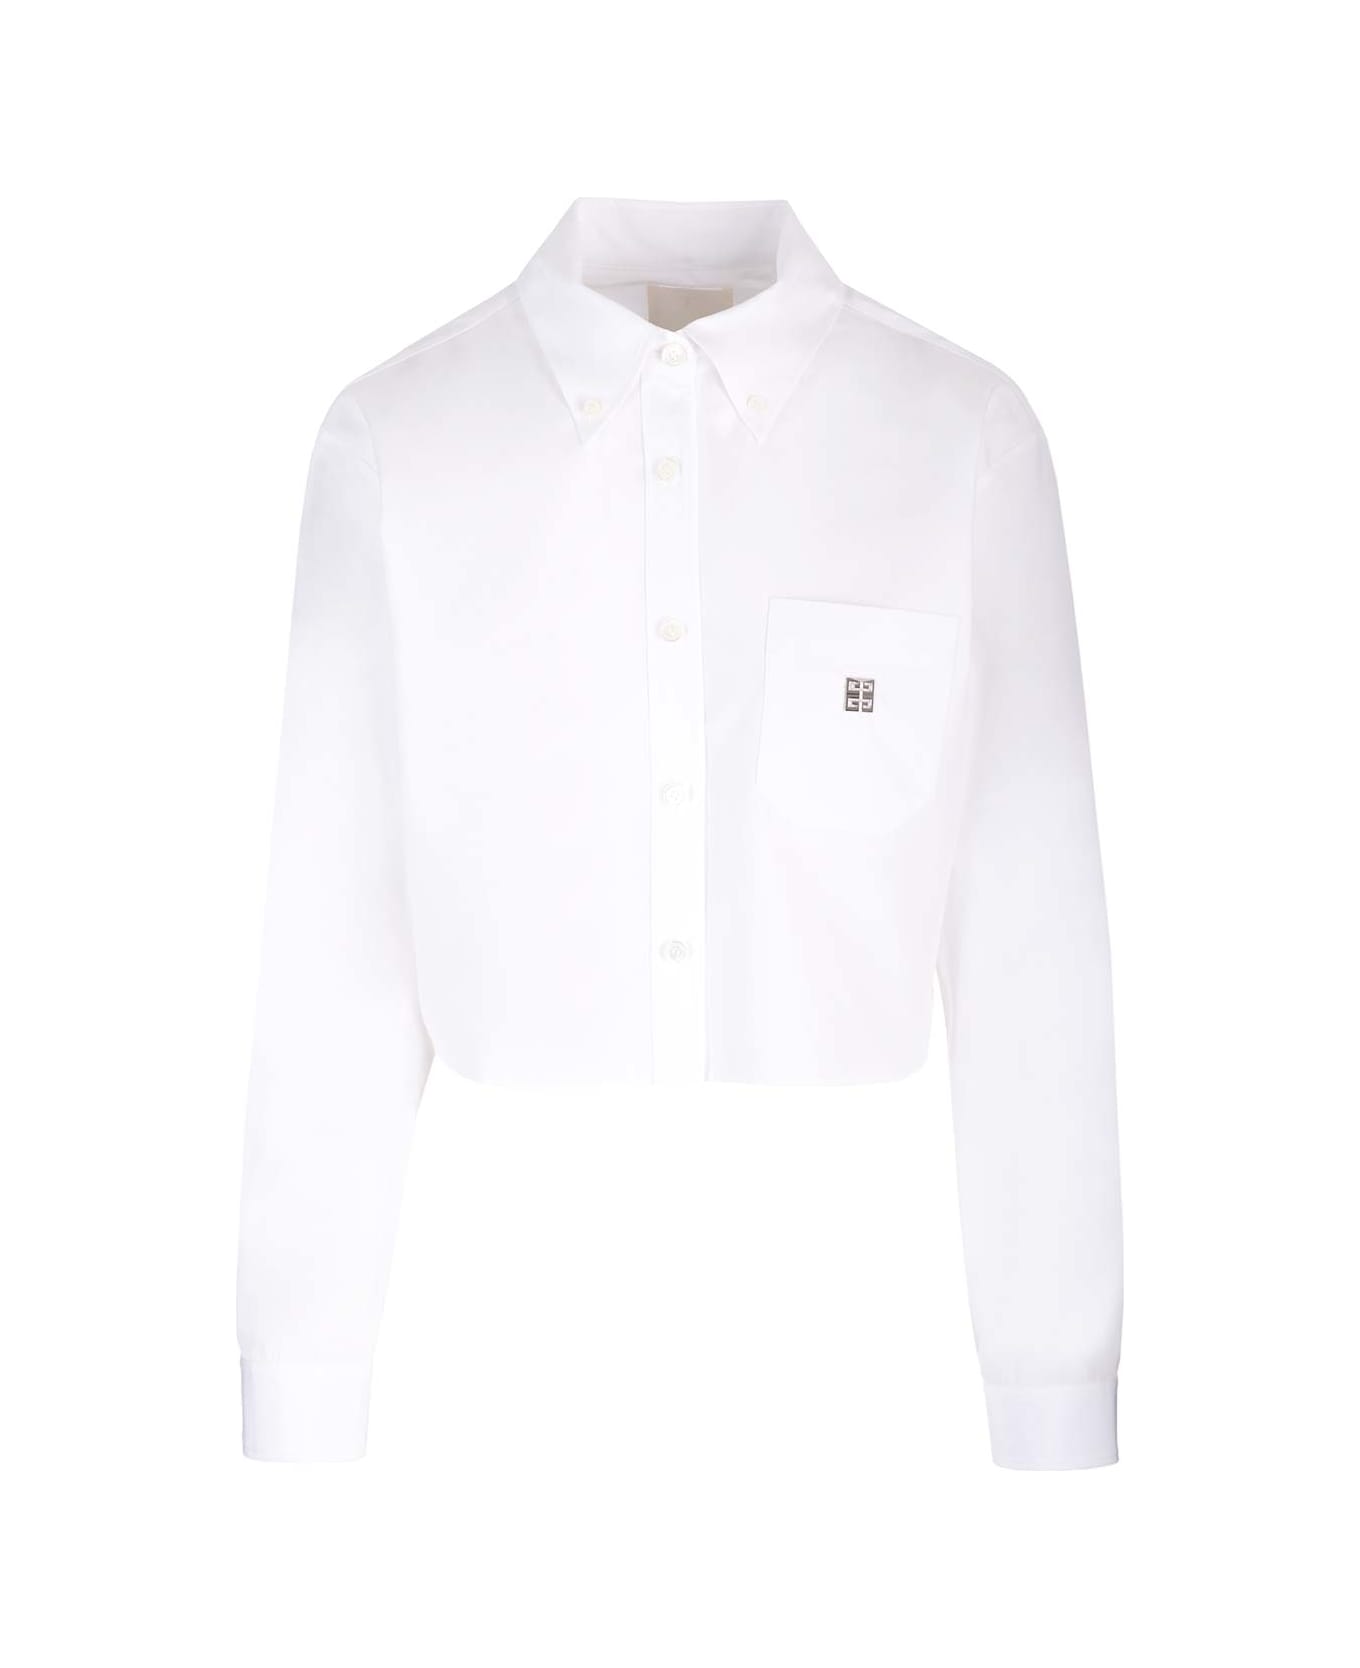 Givenchy '4g' Cropped Shirt - White